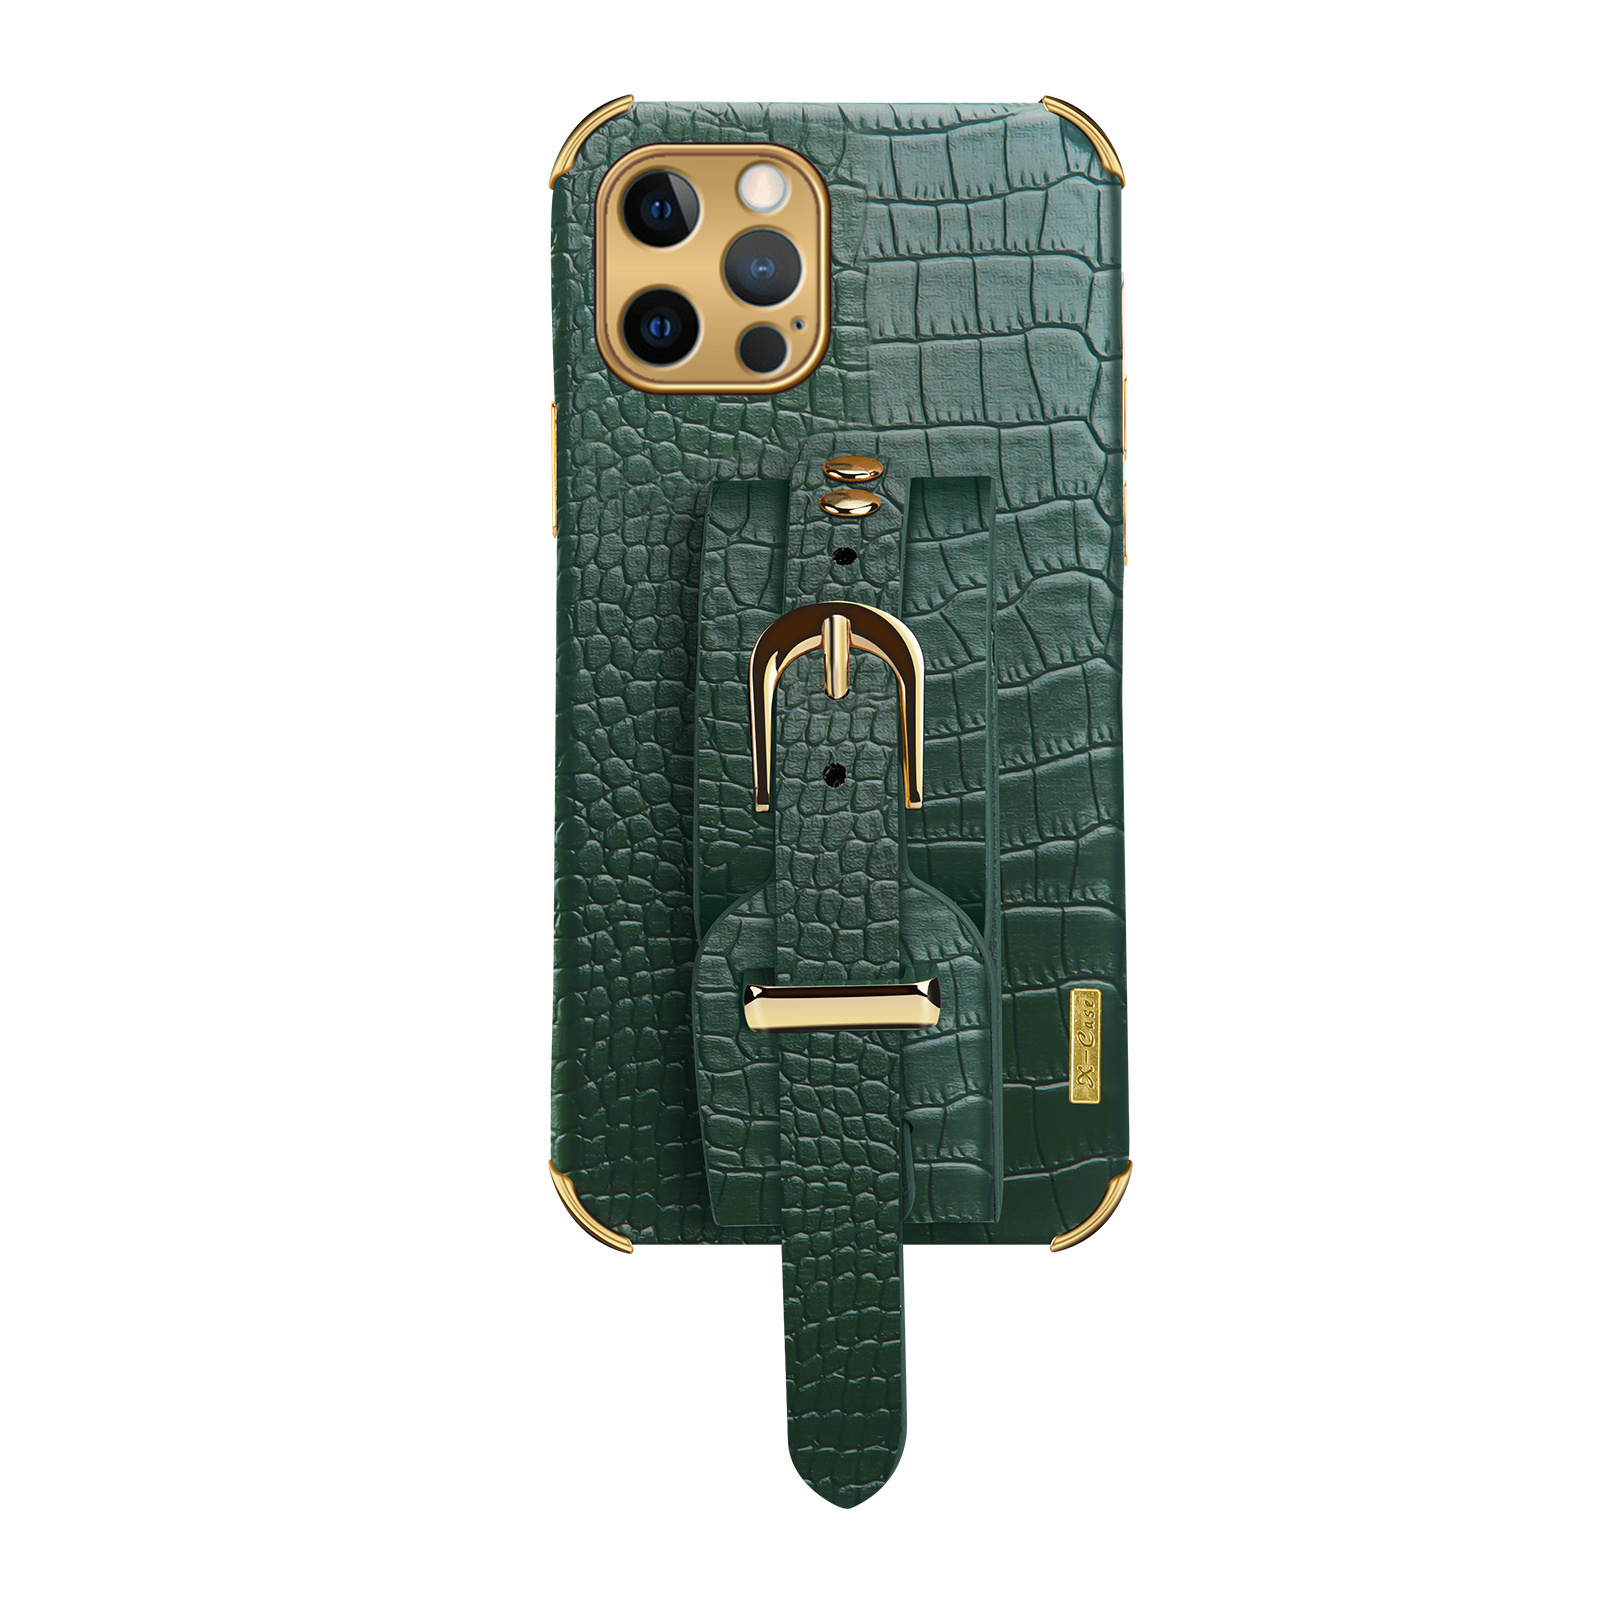 Samsung Galaxy A52s Back Cover Hoesje met Handvat - PU Leer - Backcover - Samsung Galaxy A52s - Groen